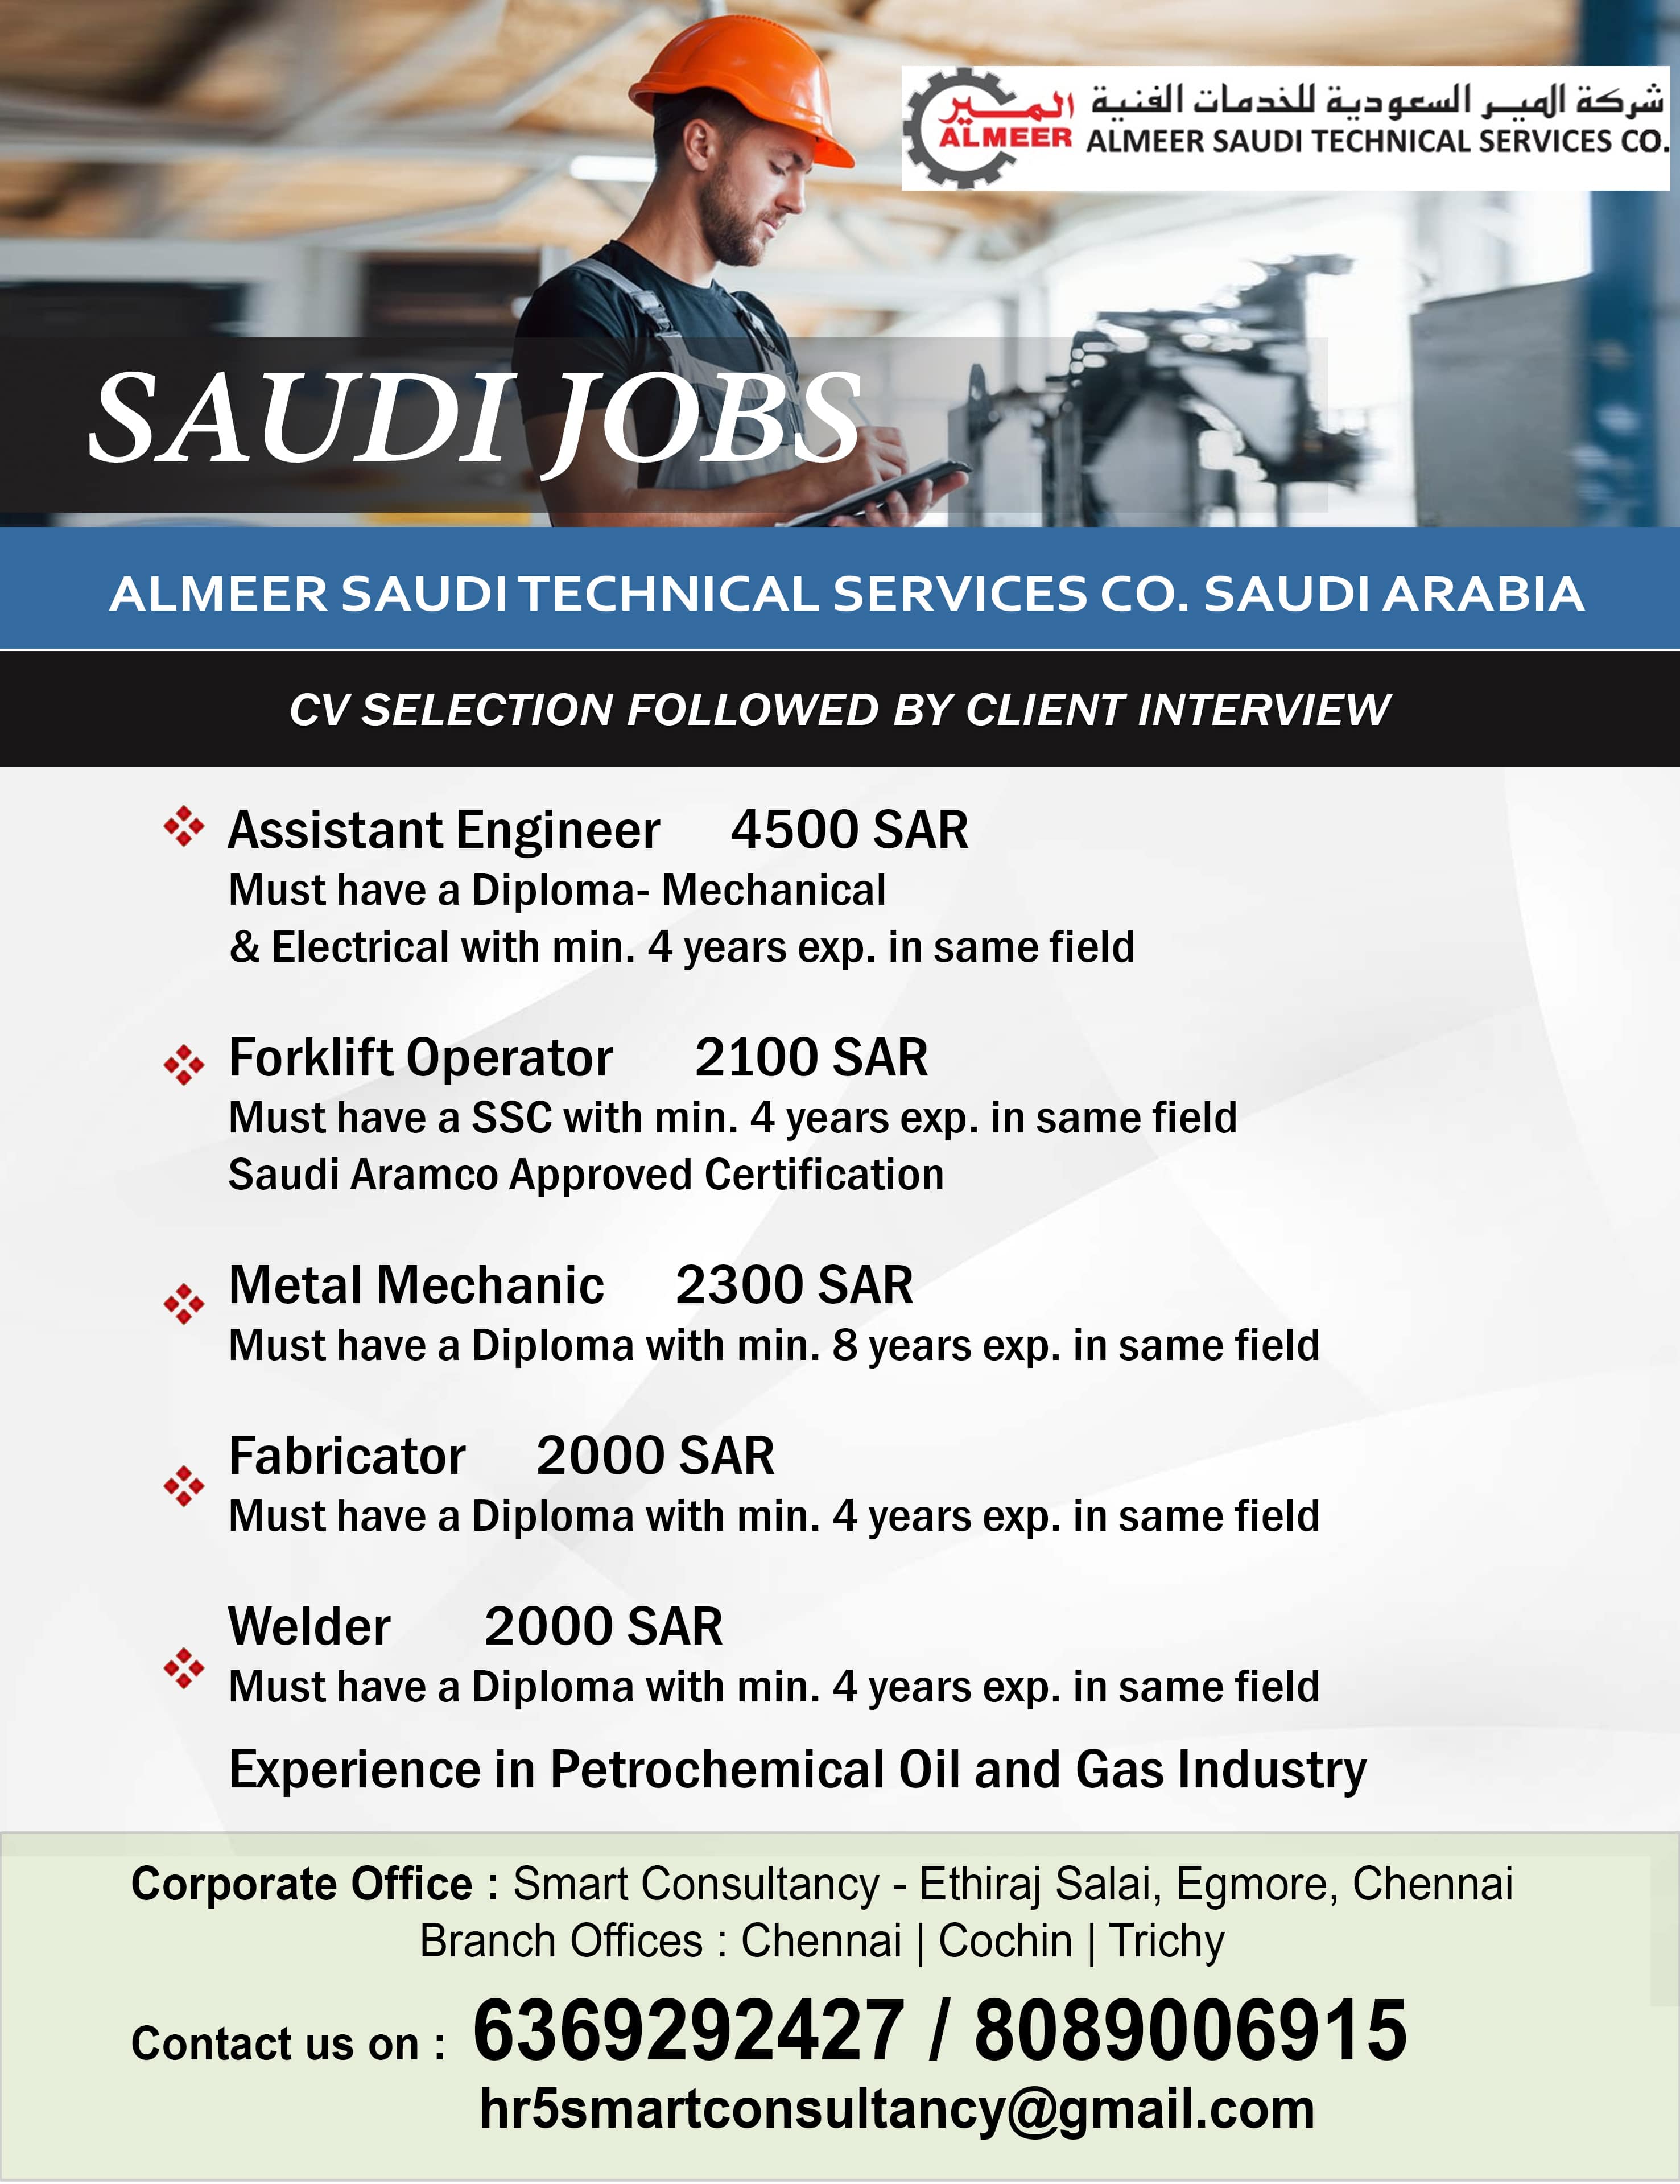 (AL MEER SAUDI TECHNICAL SERVICES ) CV SELECTION FOLLOWED BY CLIENT ONLINE INTERVIEW